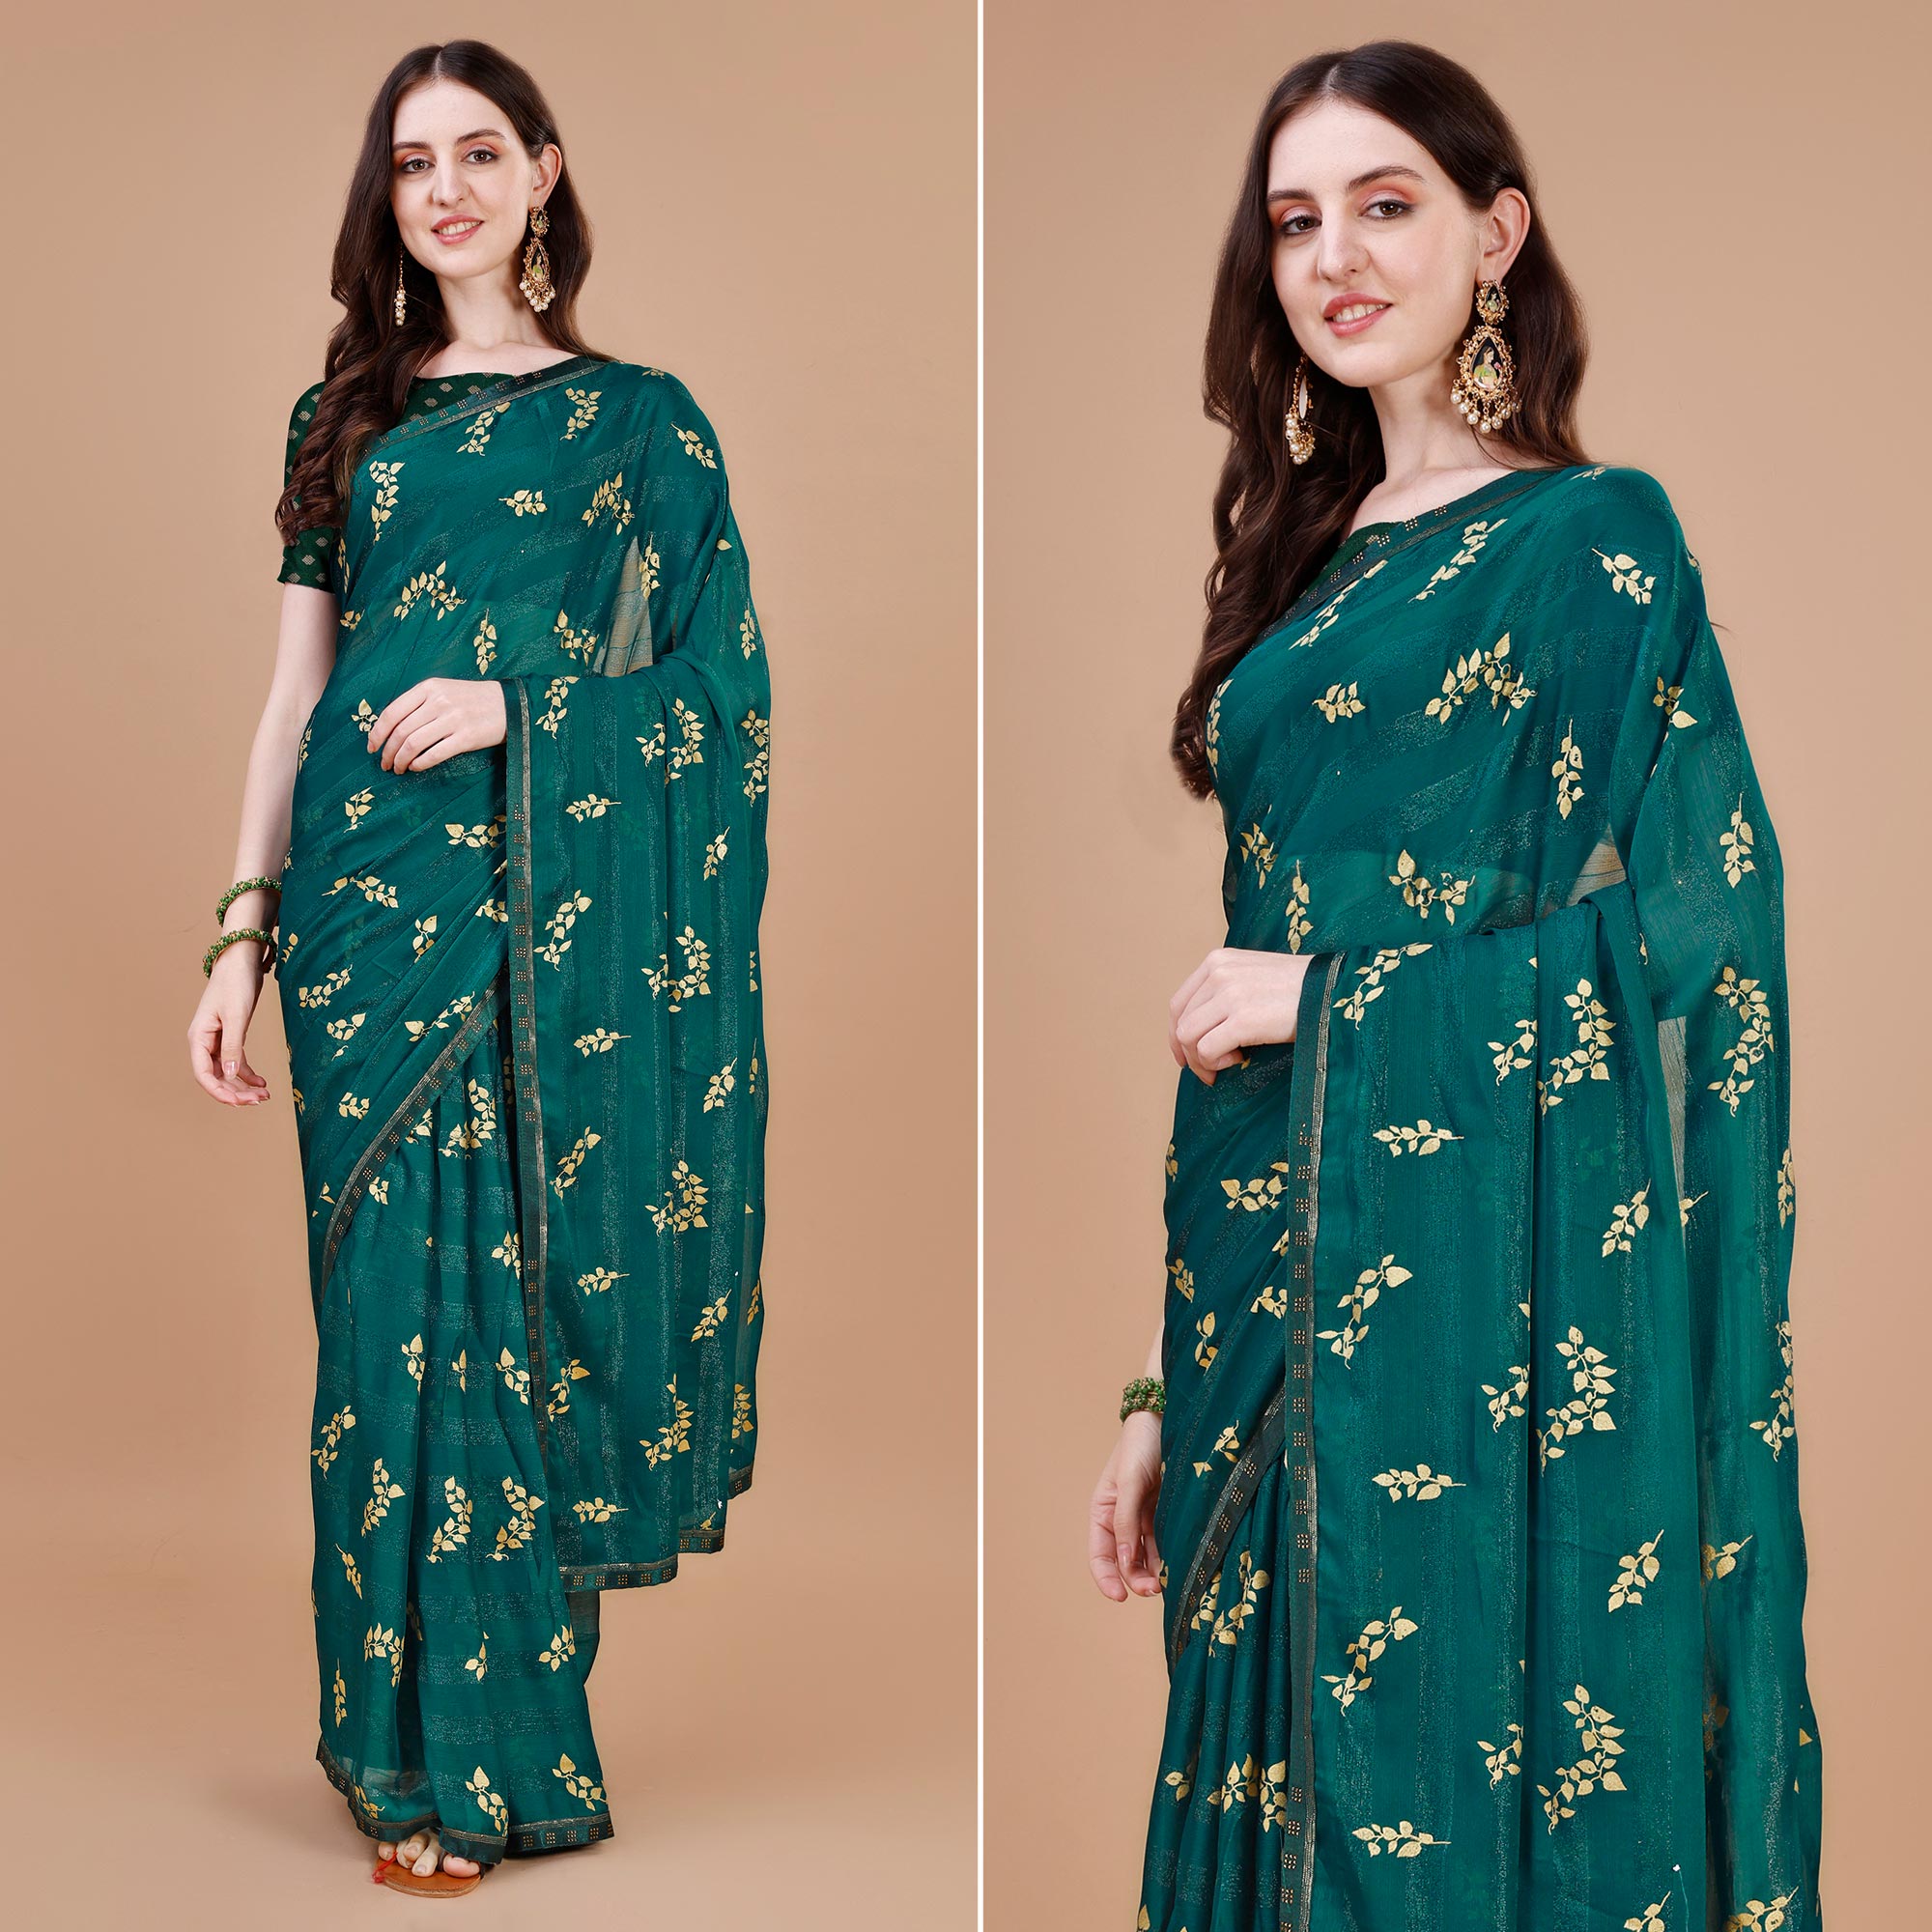 Green Foil Printed Chiffon Saree With Lace Border